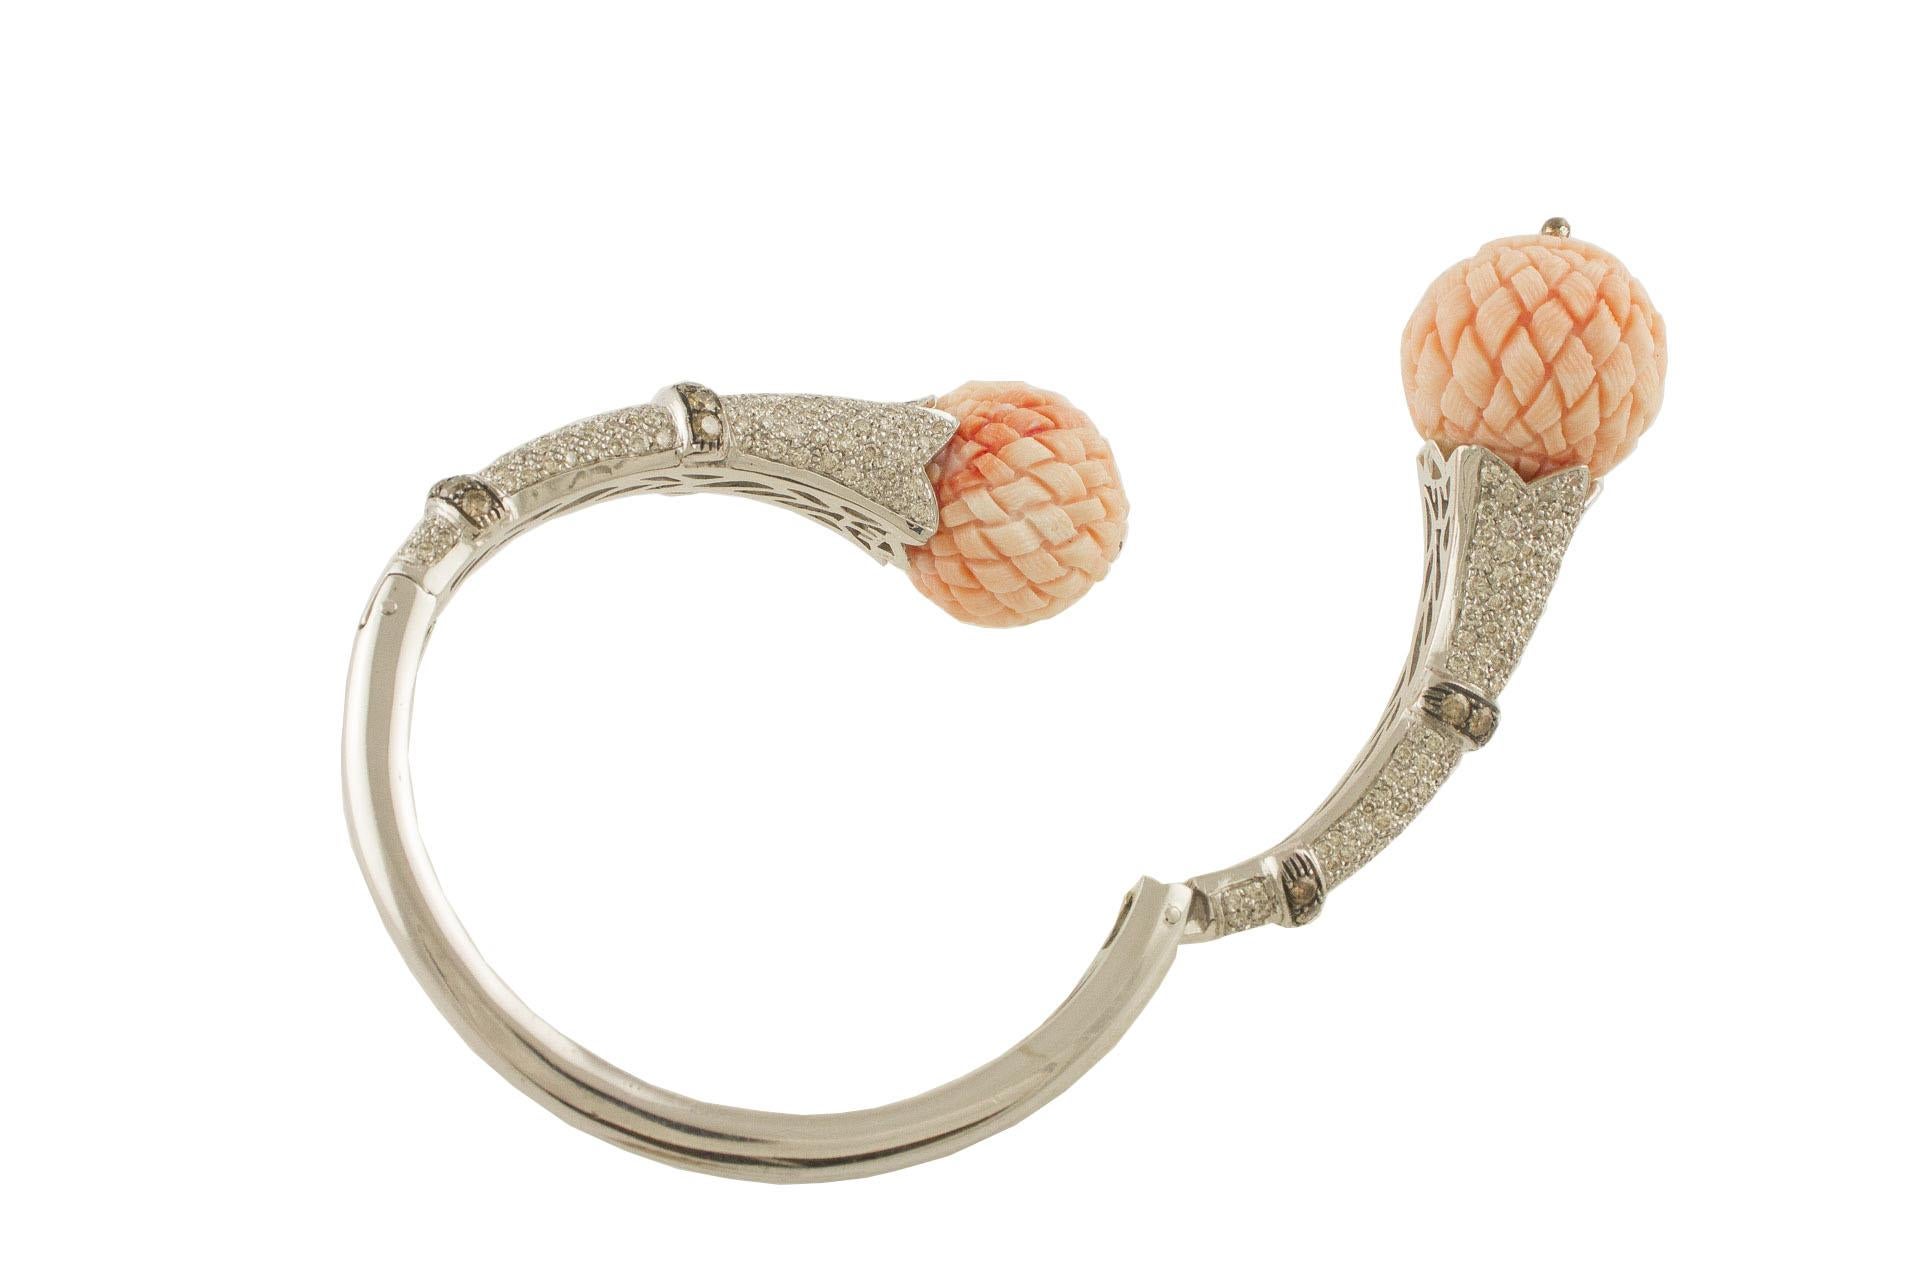 Amazing bracelet in 14K white gold mounted with 9.46 ct all white diamonds some light brown diamonds and two big pink coral spheres (25.30 g)
Diamonds 9.46 ct 
Pink Coral Spheres 25.30 gr / 22 mm X 20 mm
Total Weight 64.50 g
R.F +gueai

For any